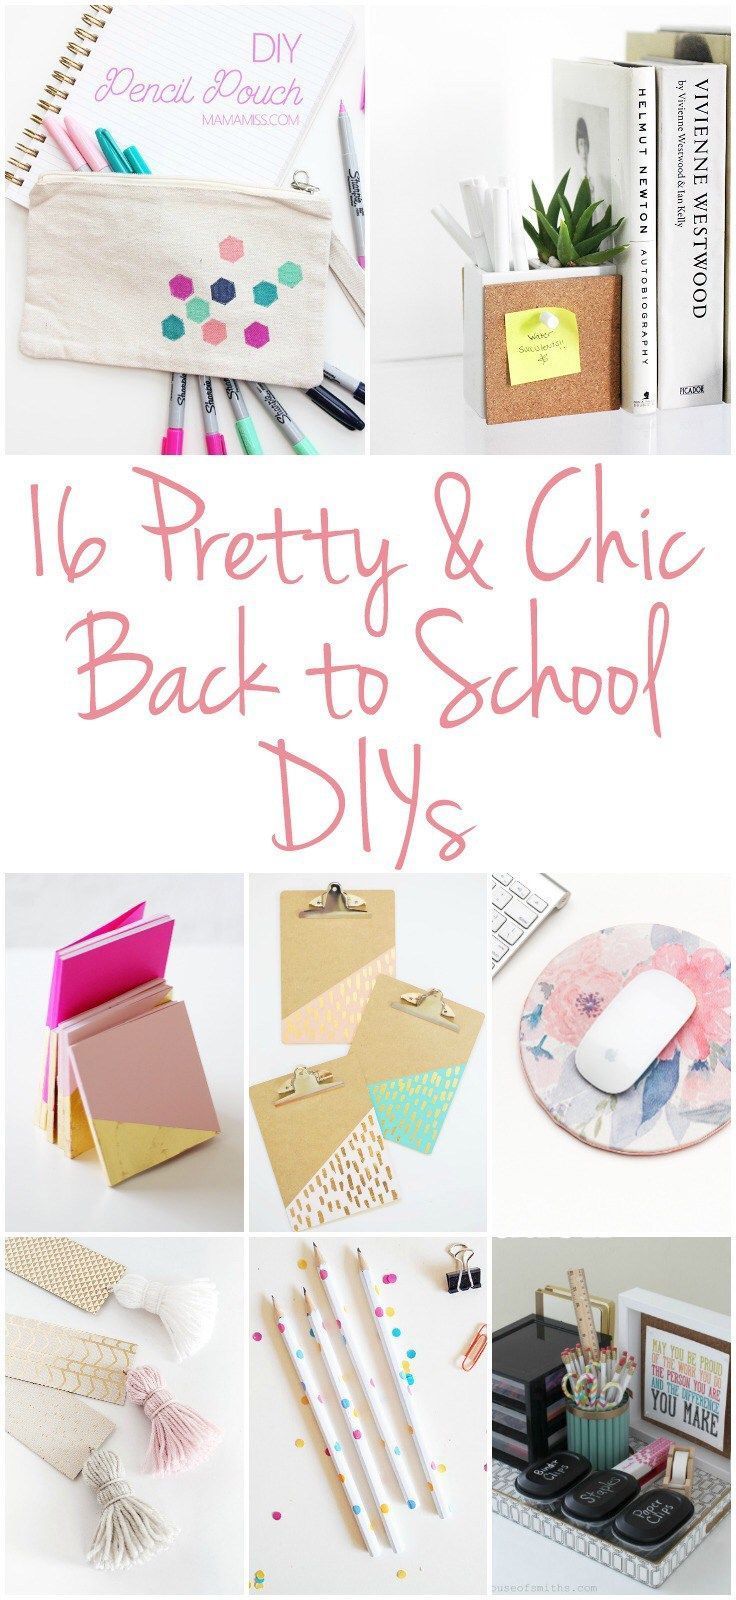 16 CHIC BACK TO SCHOOL DIY PROJECTS - 16 CHIC BACK TO SCHOOL DIY PROJECTS -   17 diy School Supplies crafts ideas